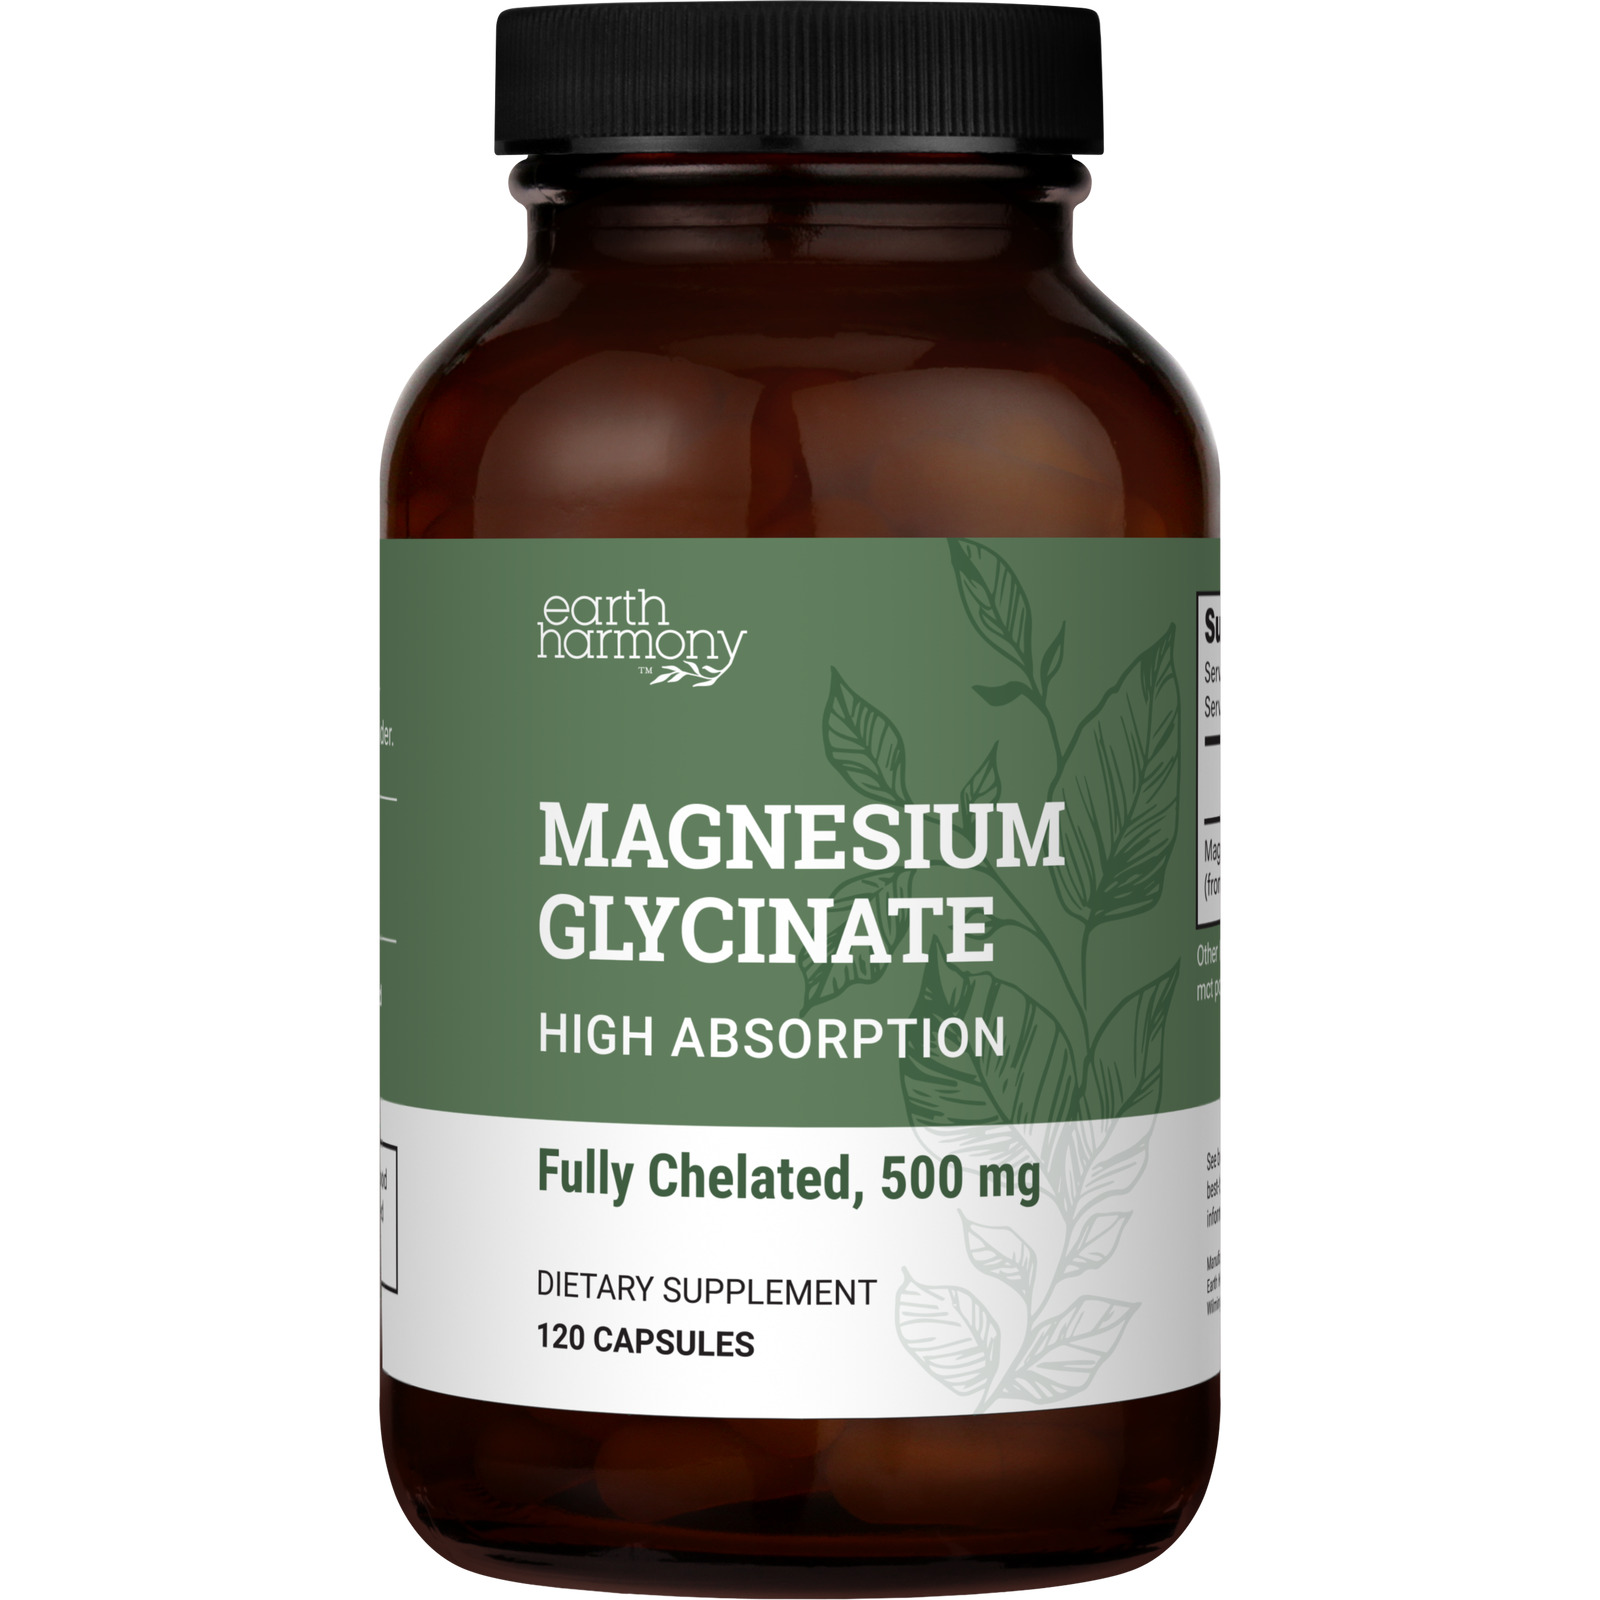 Earth Harmony Magnesium Glycinate 500mg, 2-Pack - 120 Capsules Per Bottle